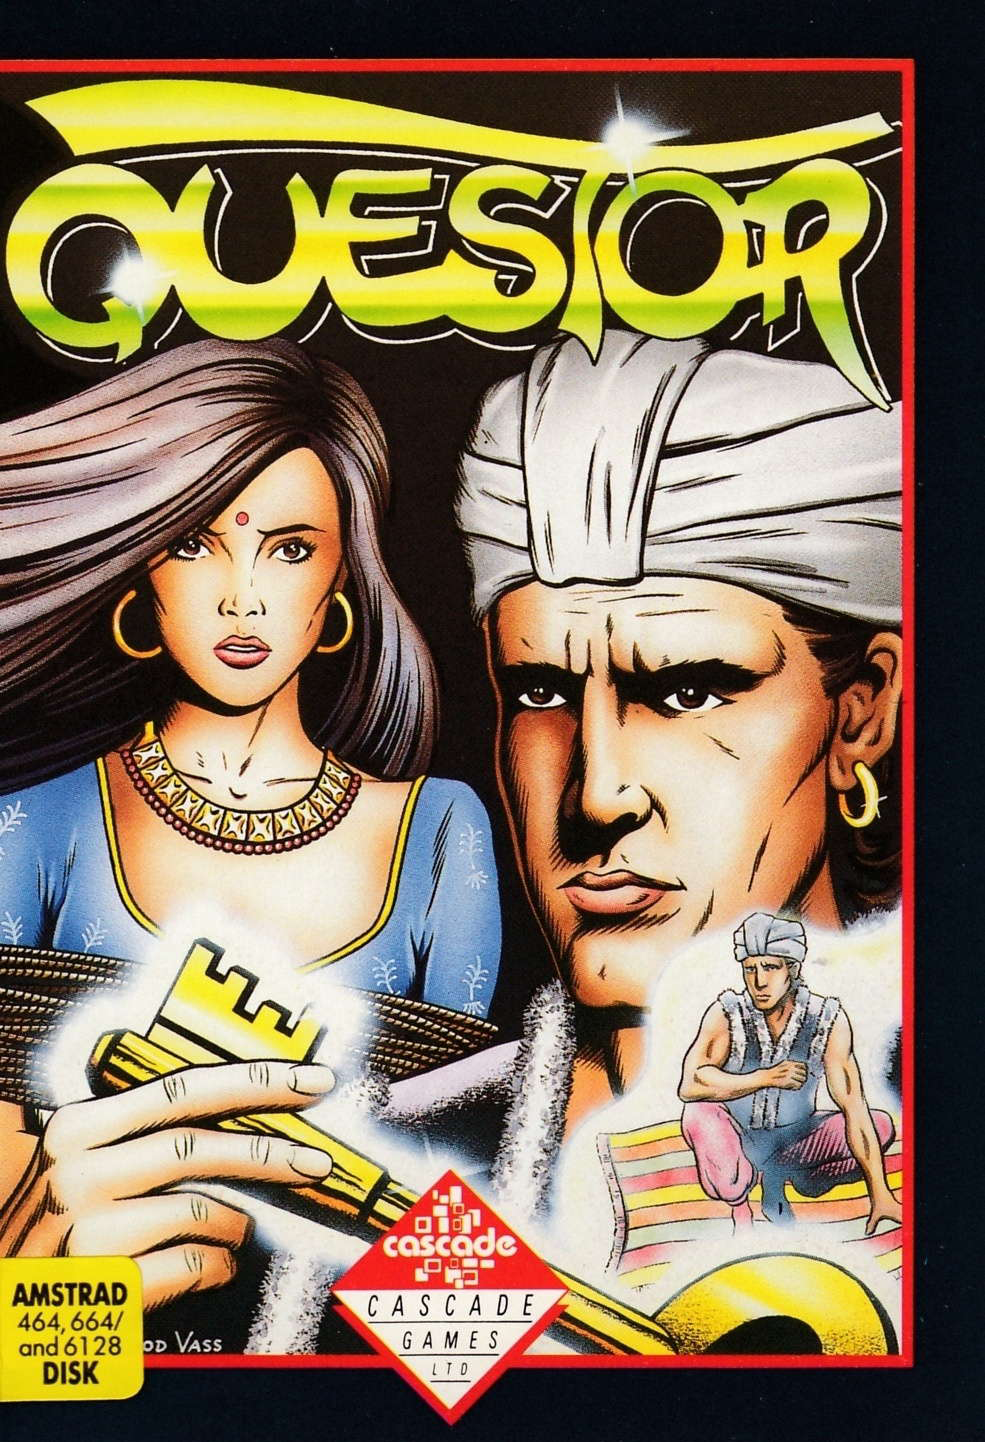 cover of the Amstrad CPC game Questor  by GameBase CPC